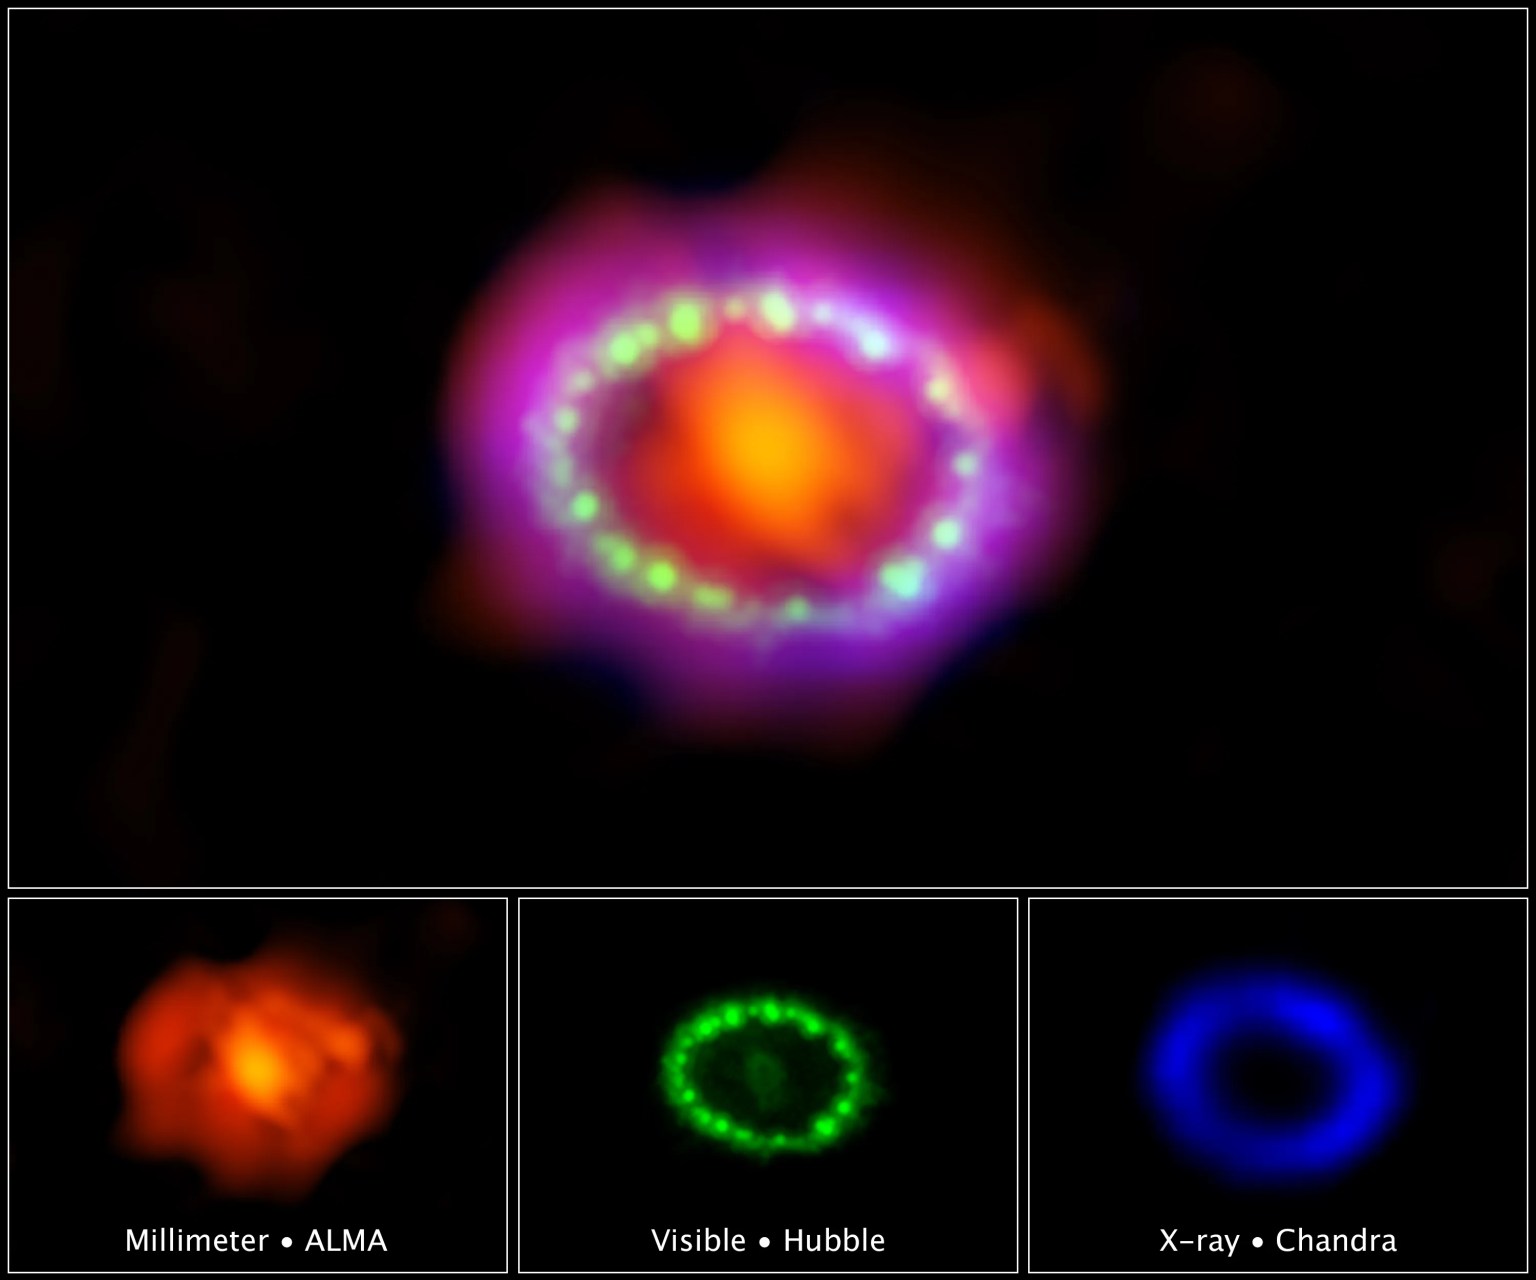 Astronomers combined observations from three different observatories to produce this colorful, multiwavelength image of the intricate remains of Supernova 1987A.